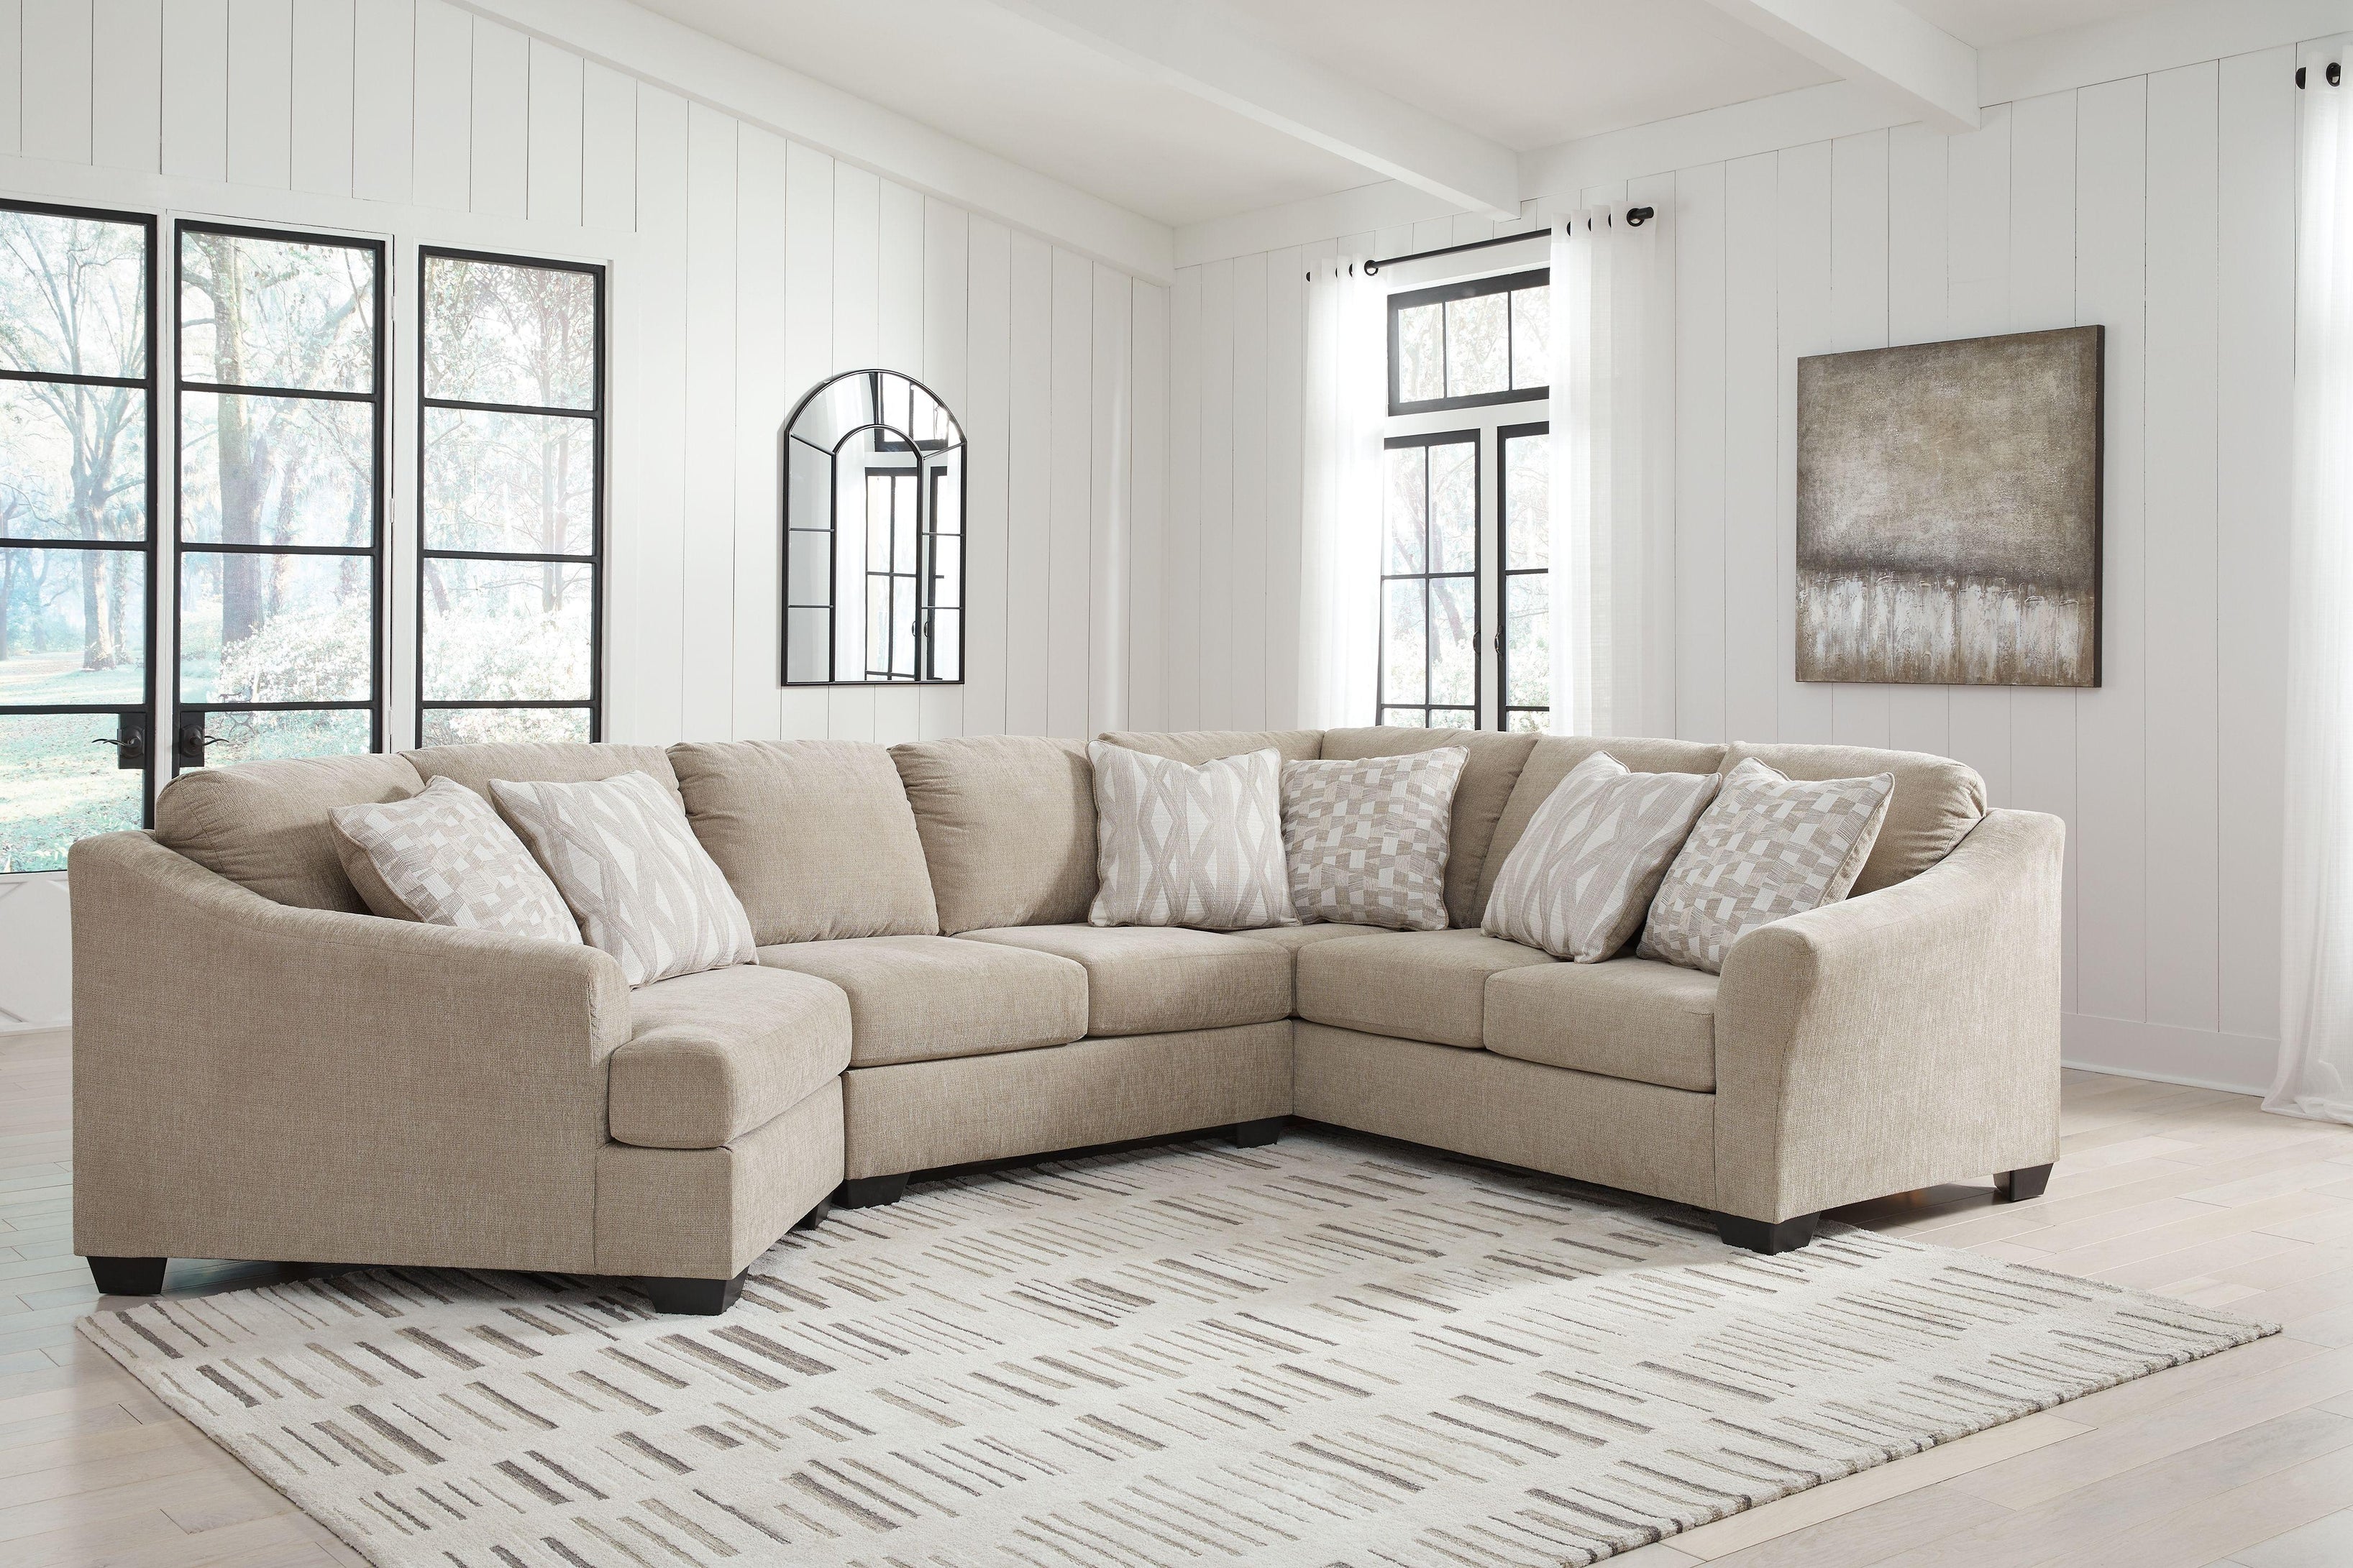 Signature Design by Ashley® - Brogan Bay - Sectional - 5th Avenue Furniture